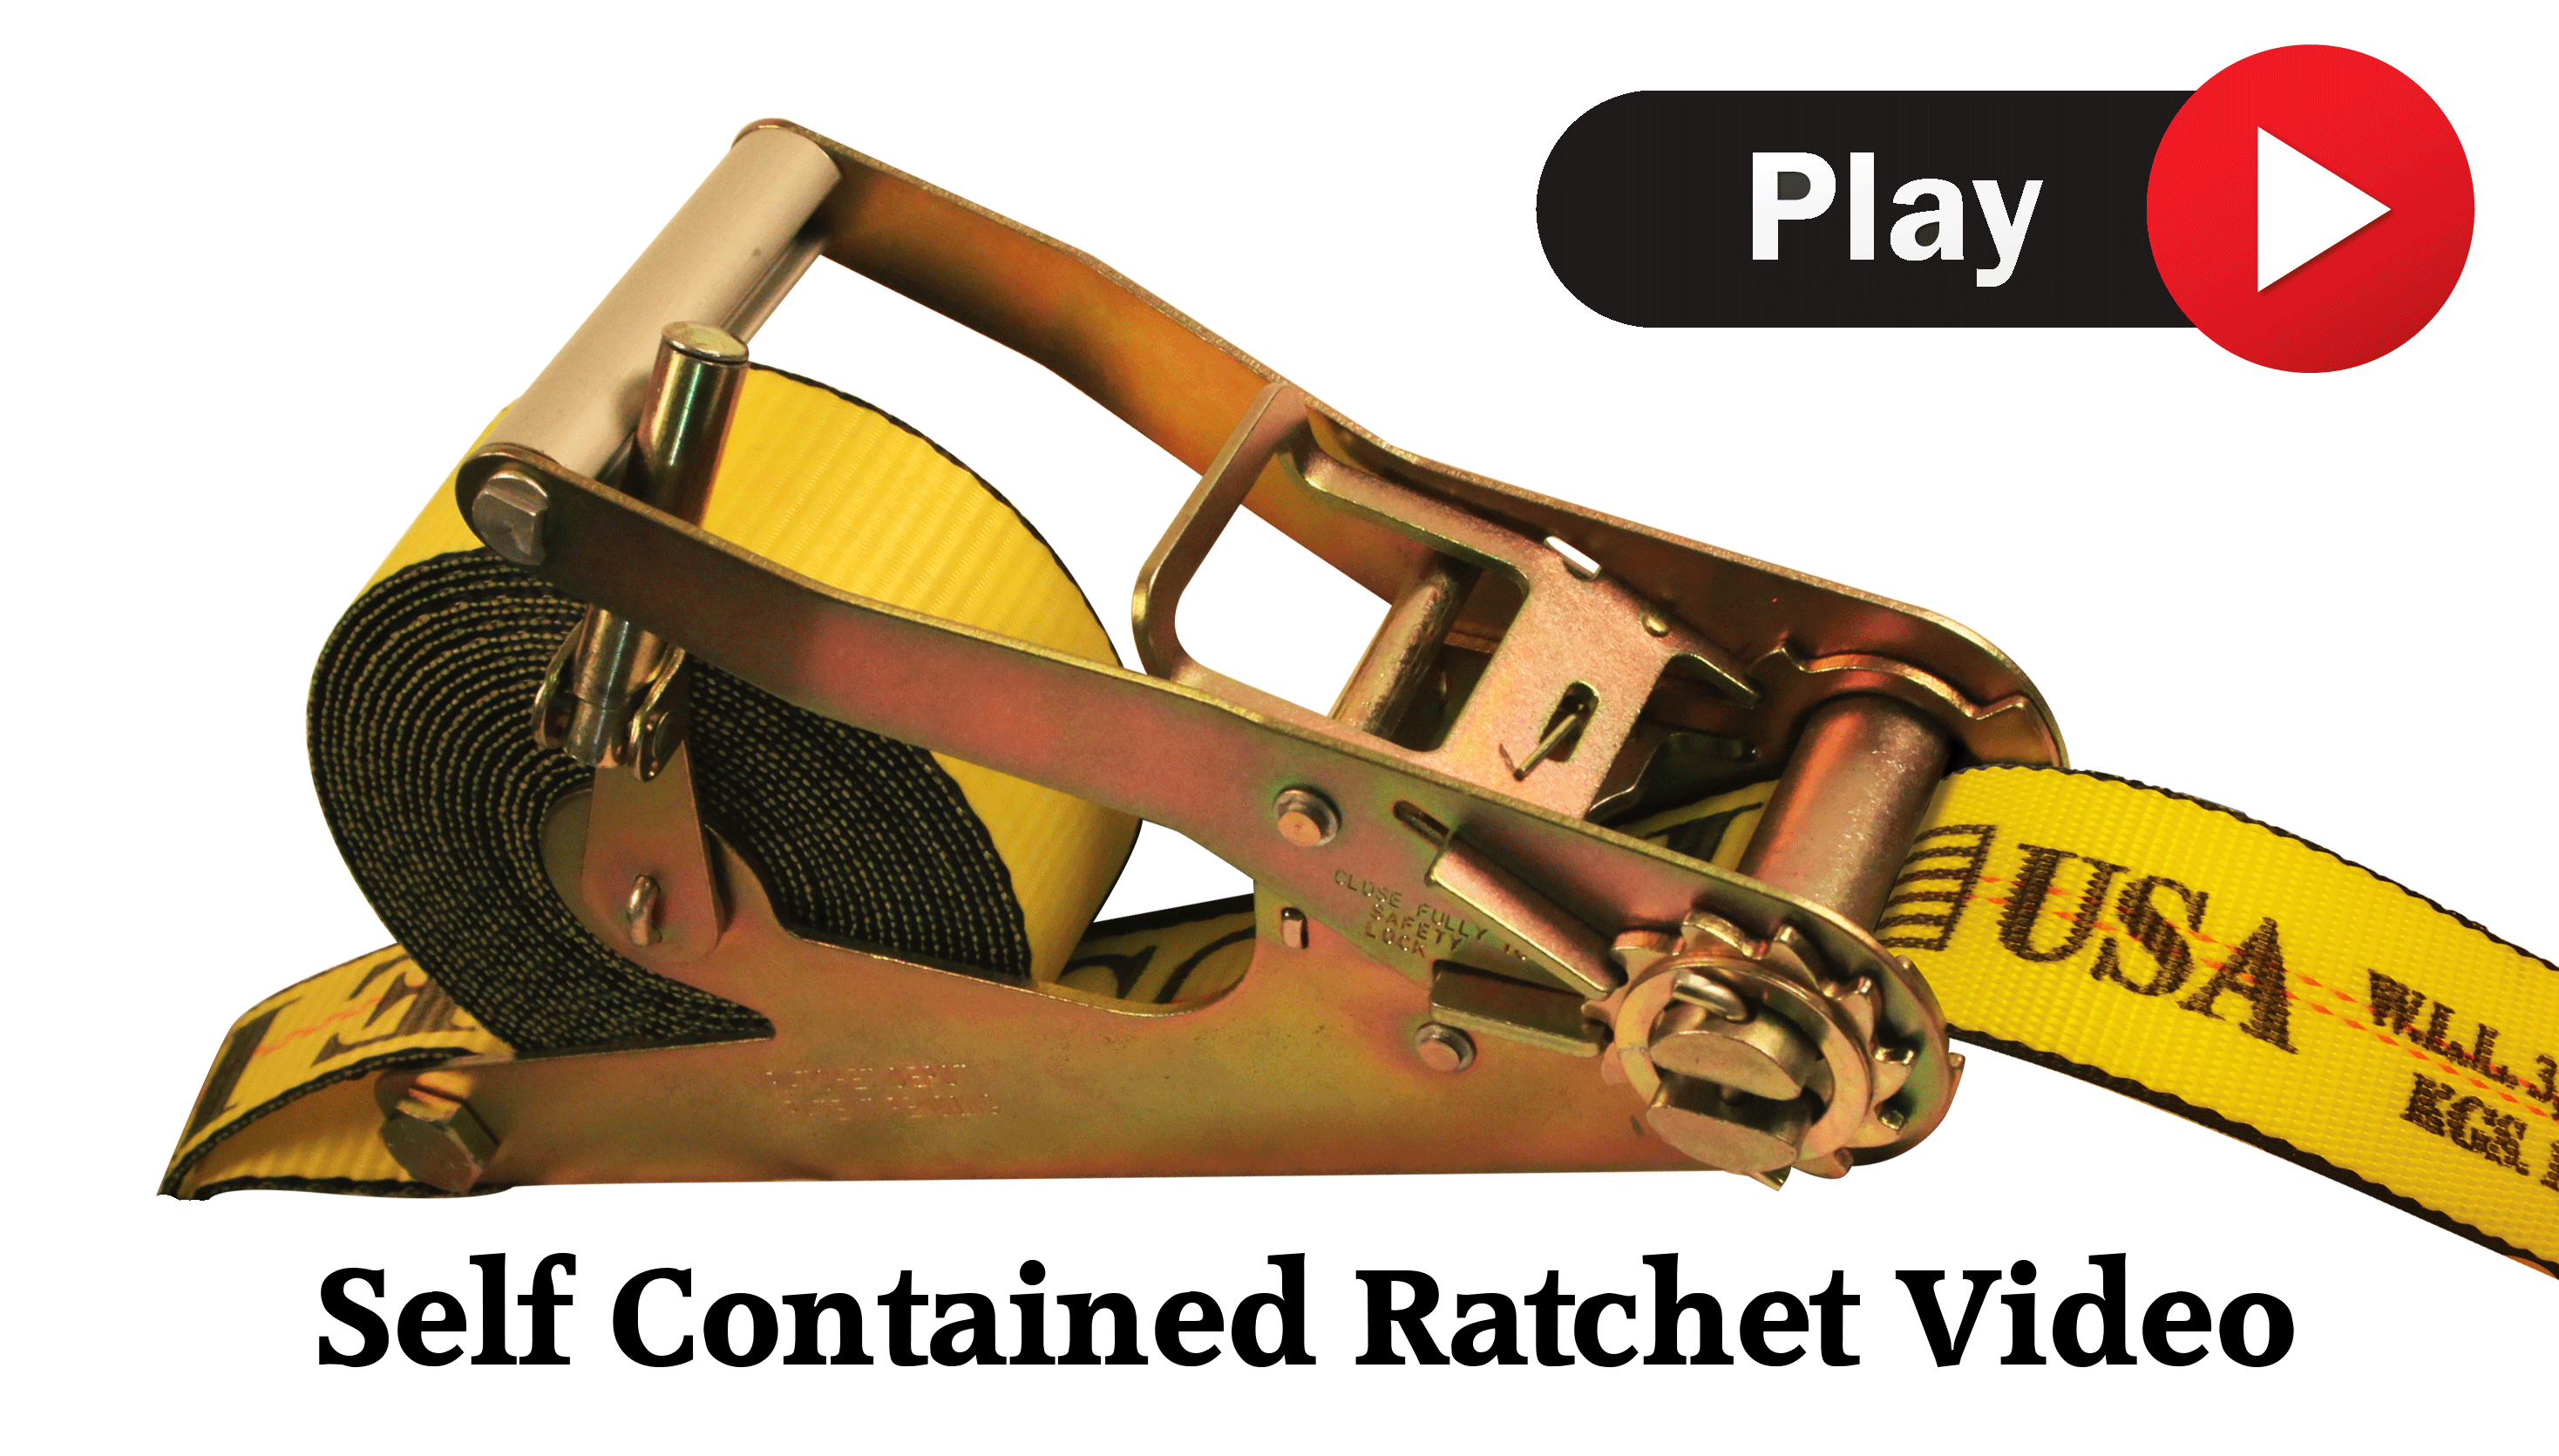 Self Contained Ratchet